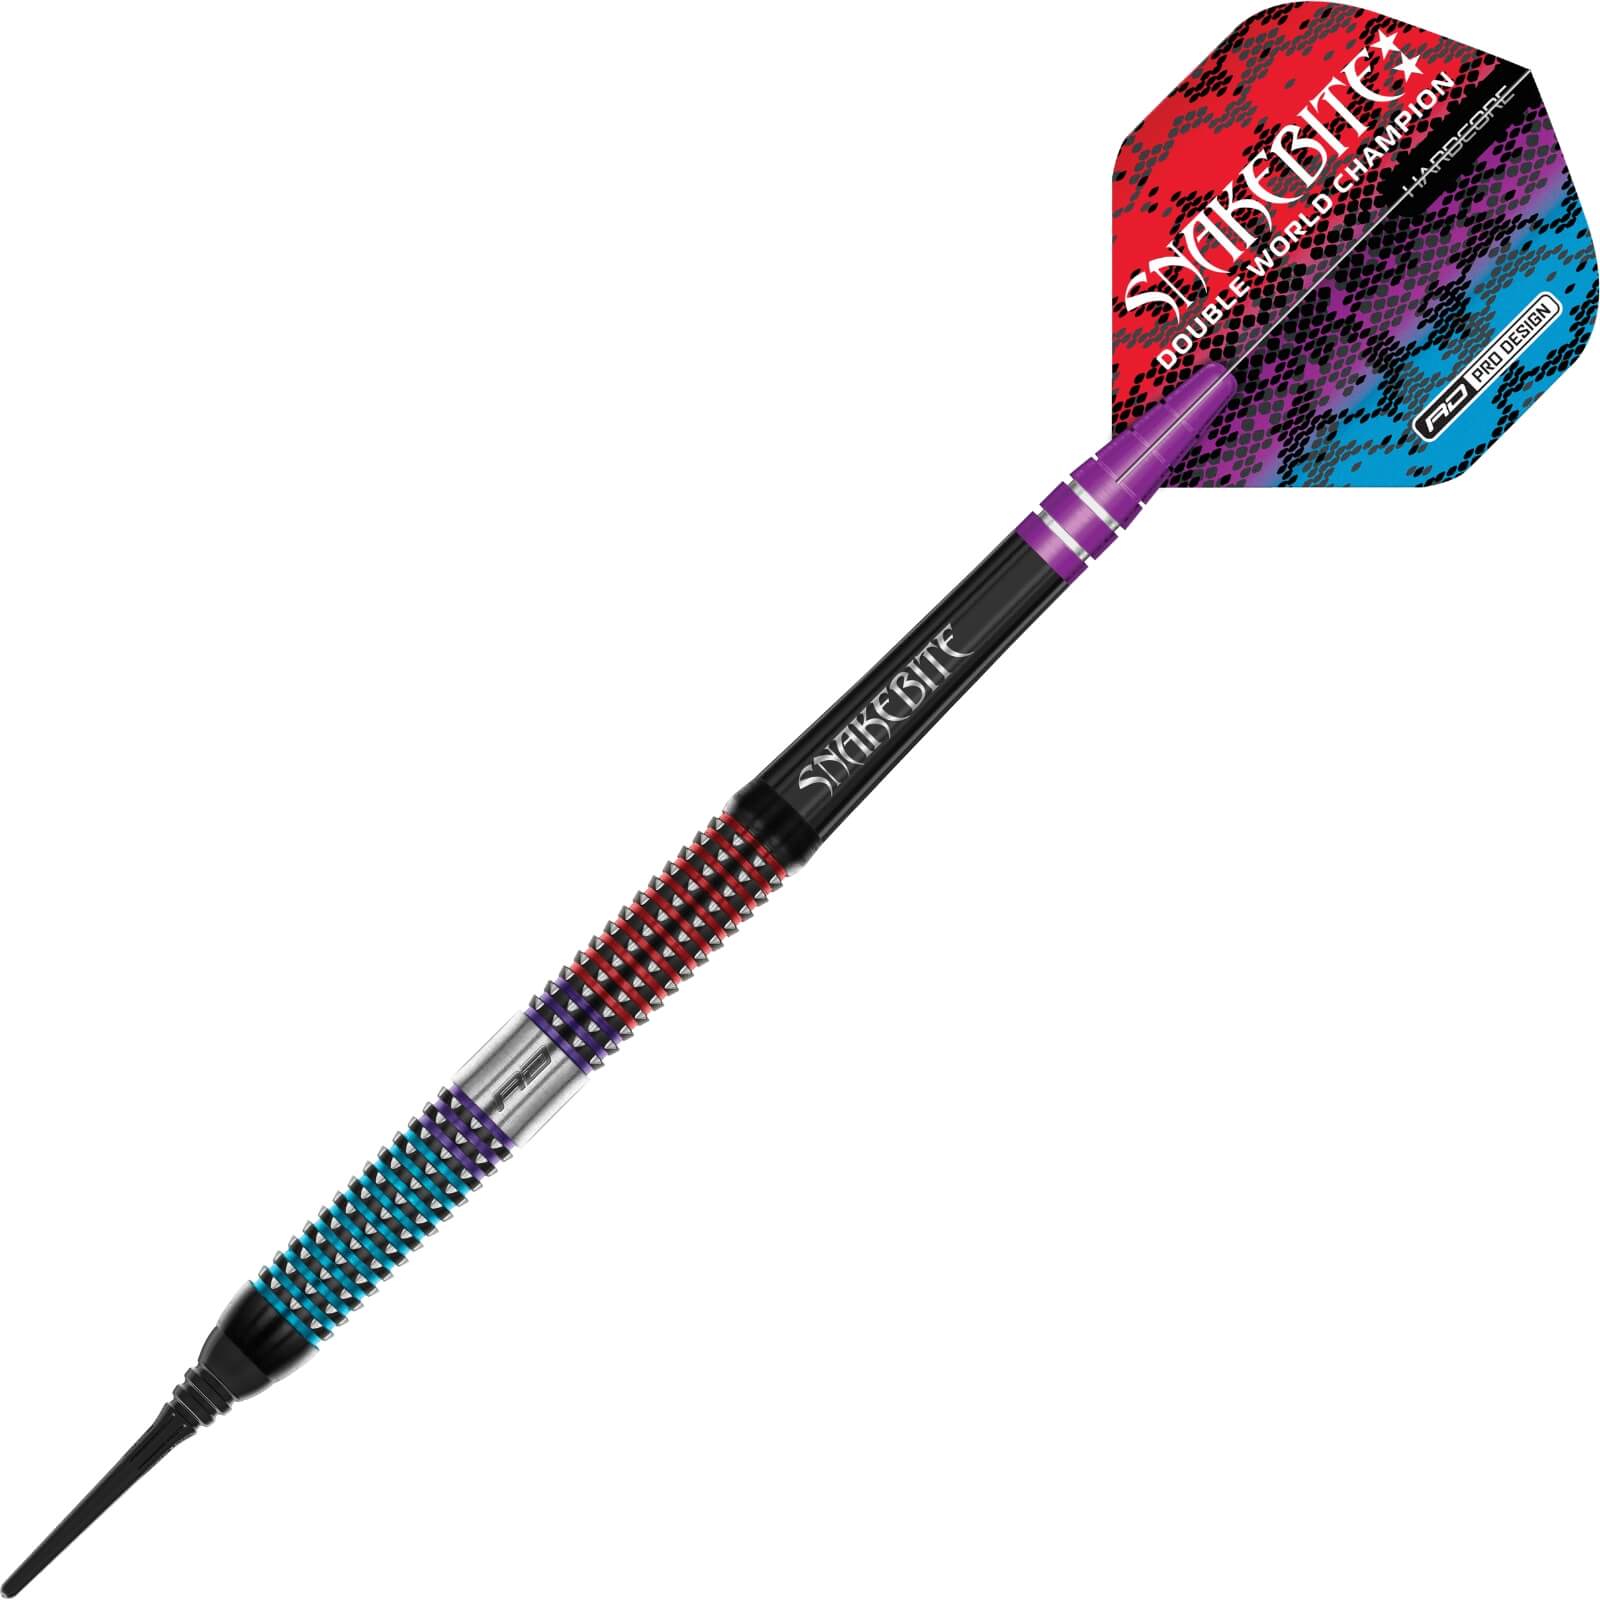 Red Dragon Peter Wright Spirit Soft Tip Darts For Sale